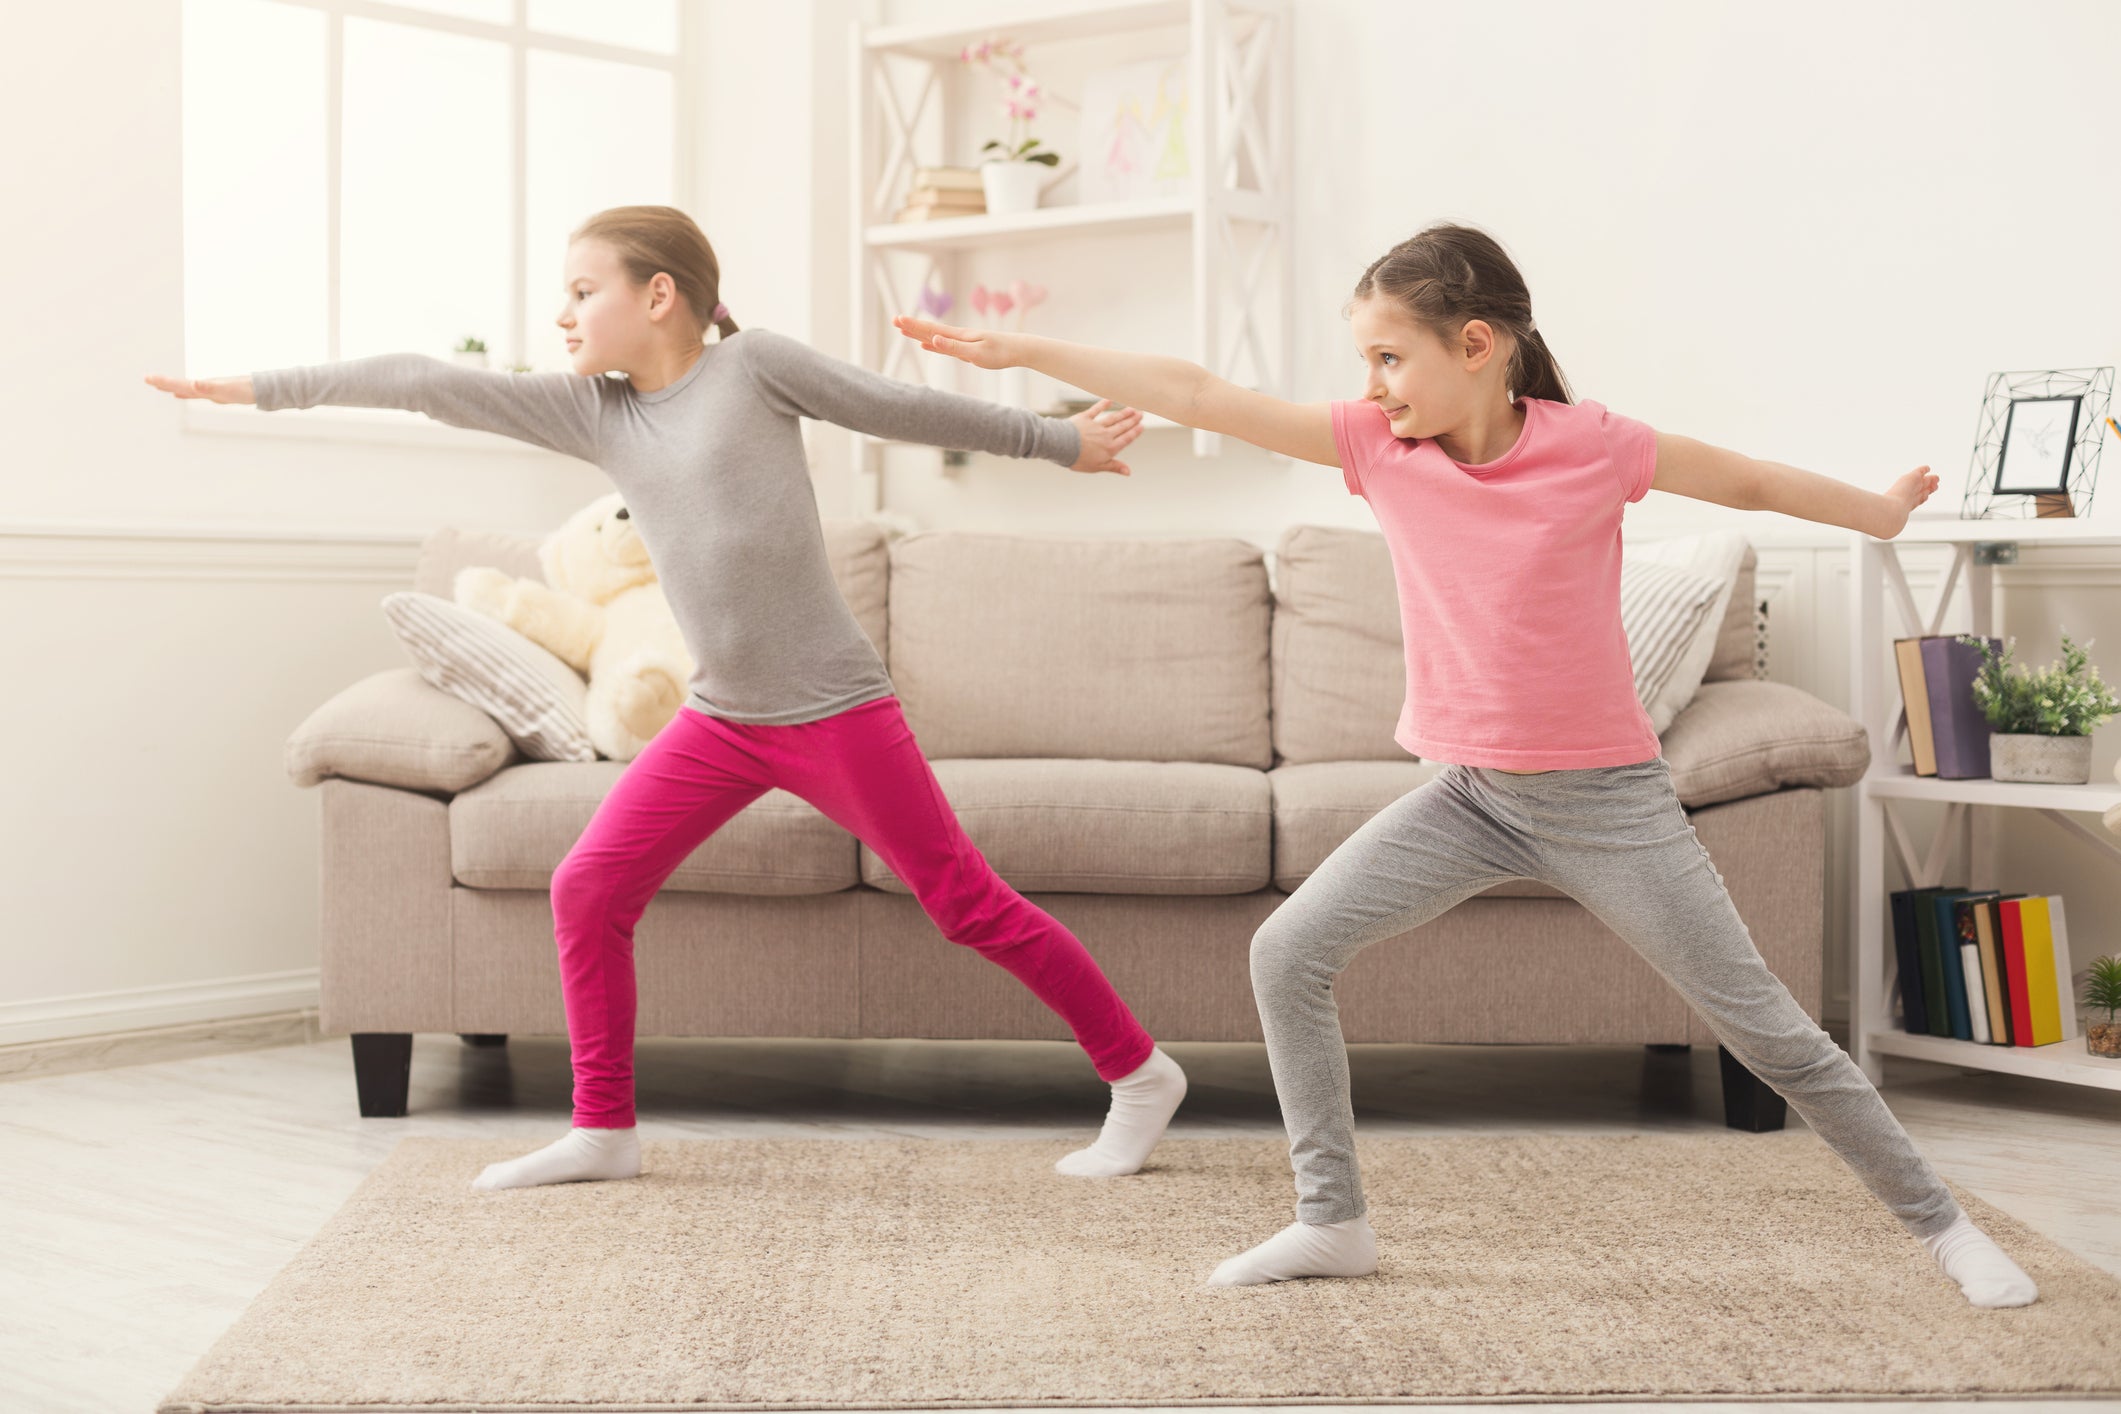 A moment’s peace: keep the kids amused with some YouTube yoga